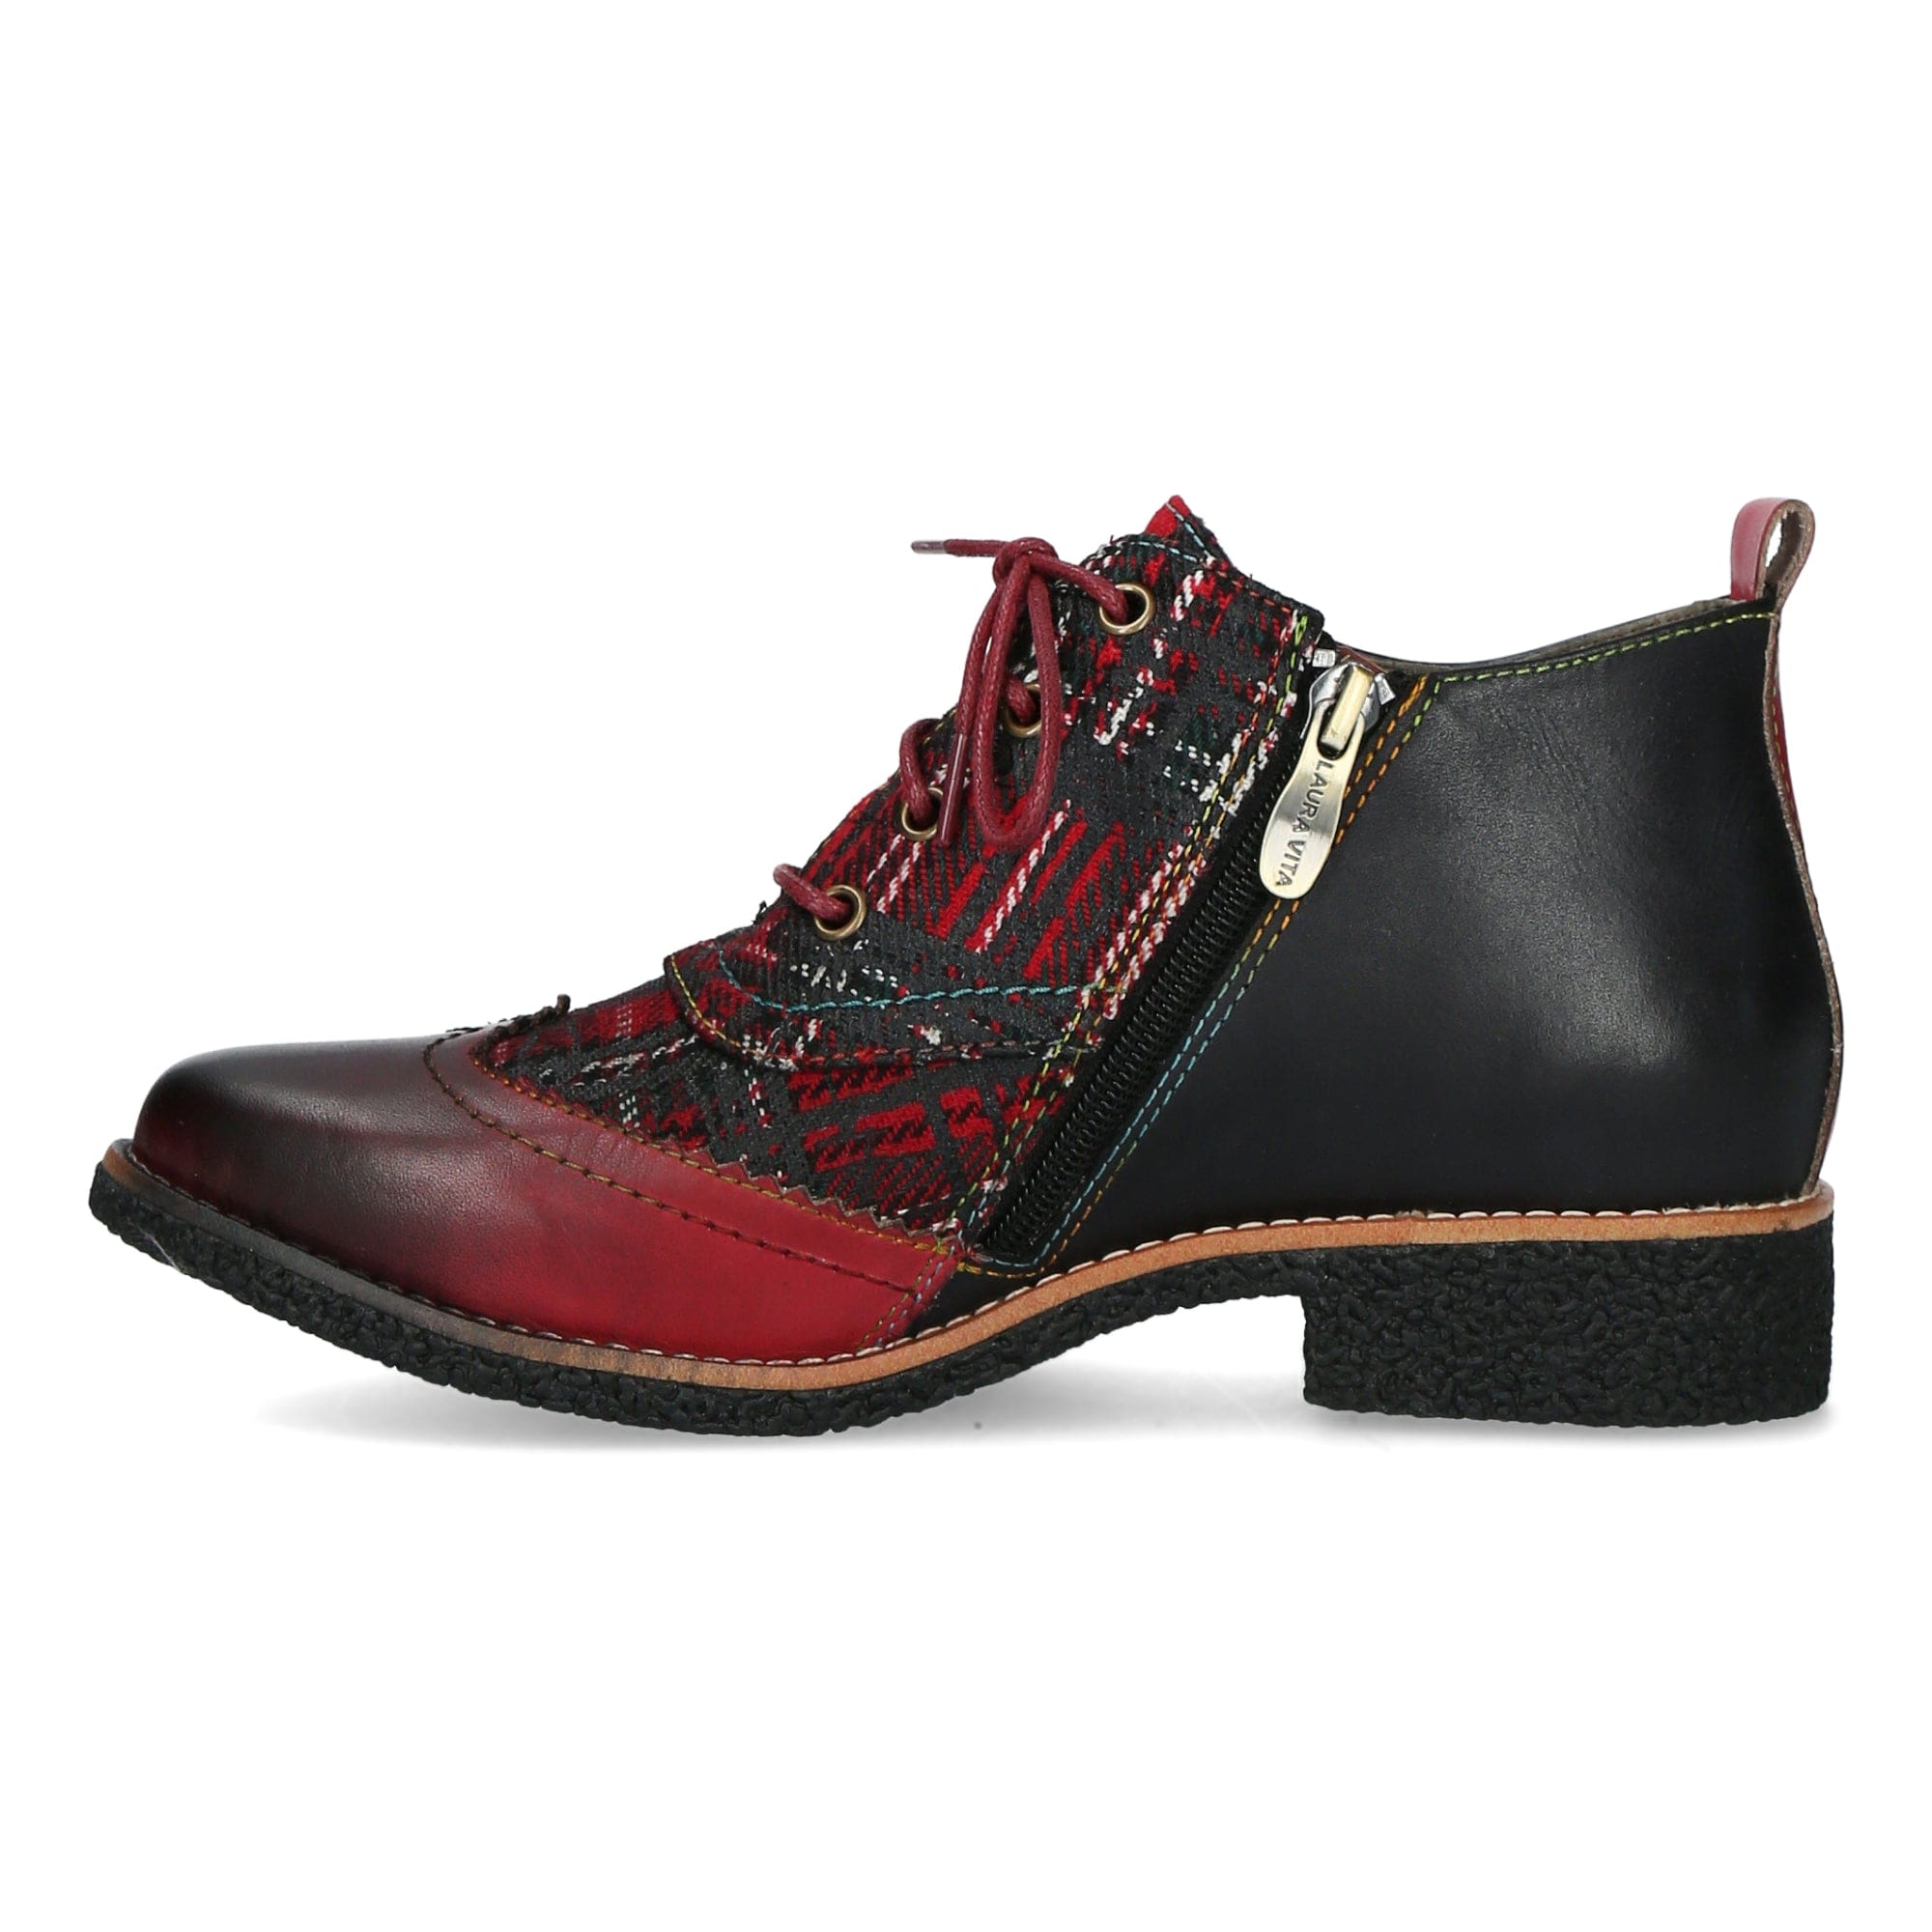 Schuh COCRALIEO 17 - Boots